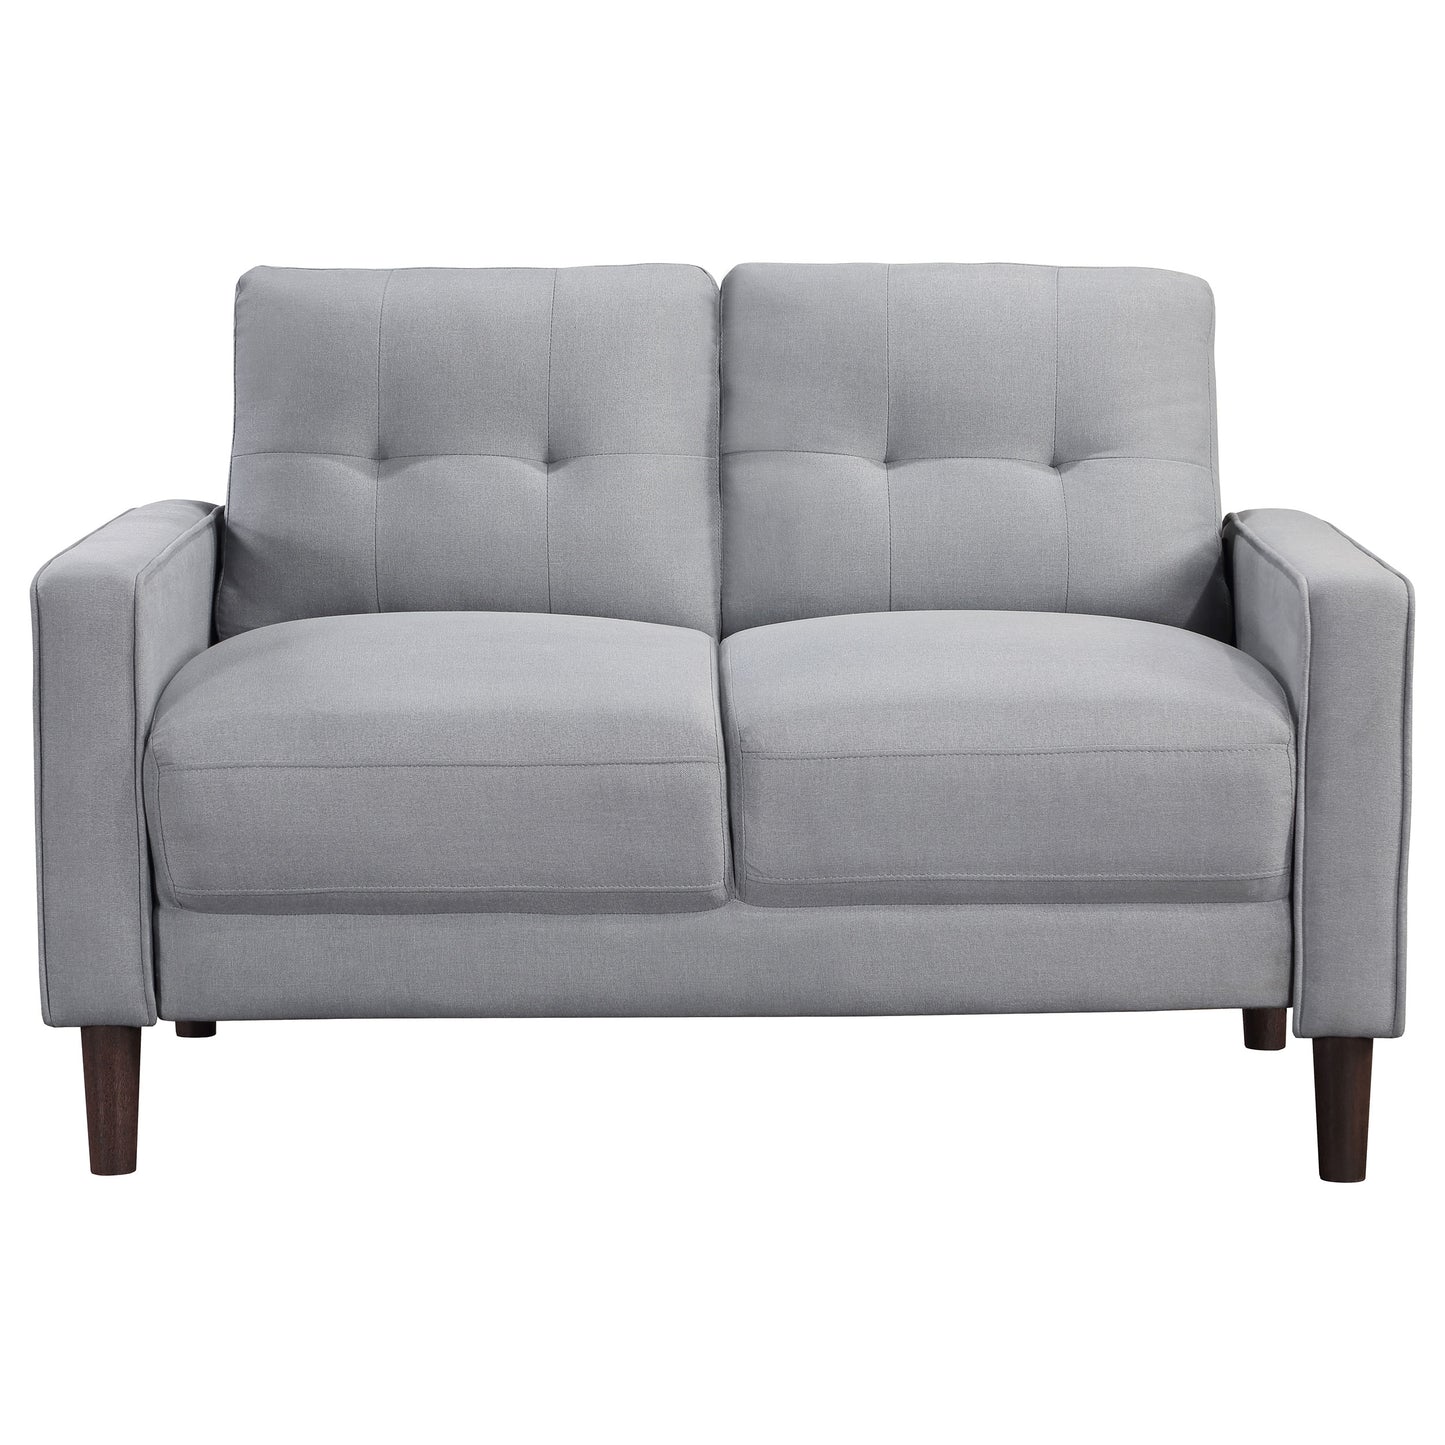 Bowen 3-piece Upholstered Track Arms Tufted Sofa Set Grey